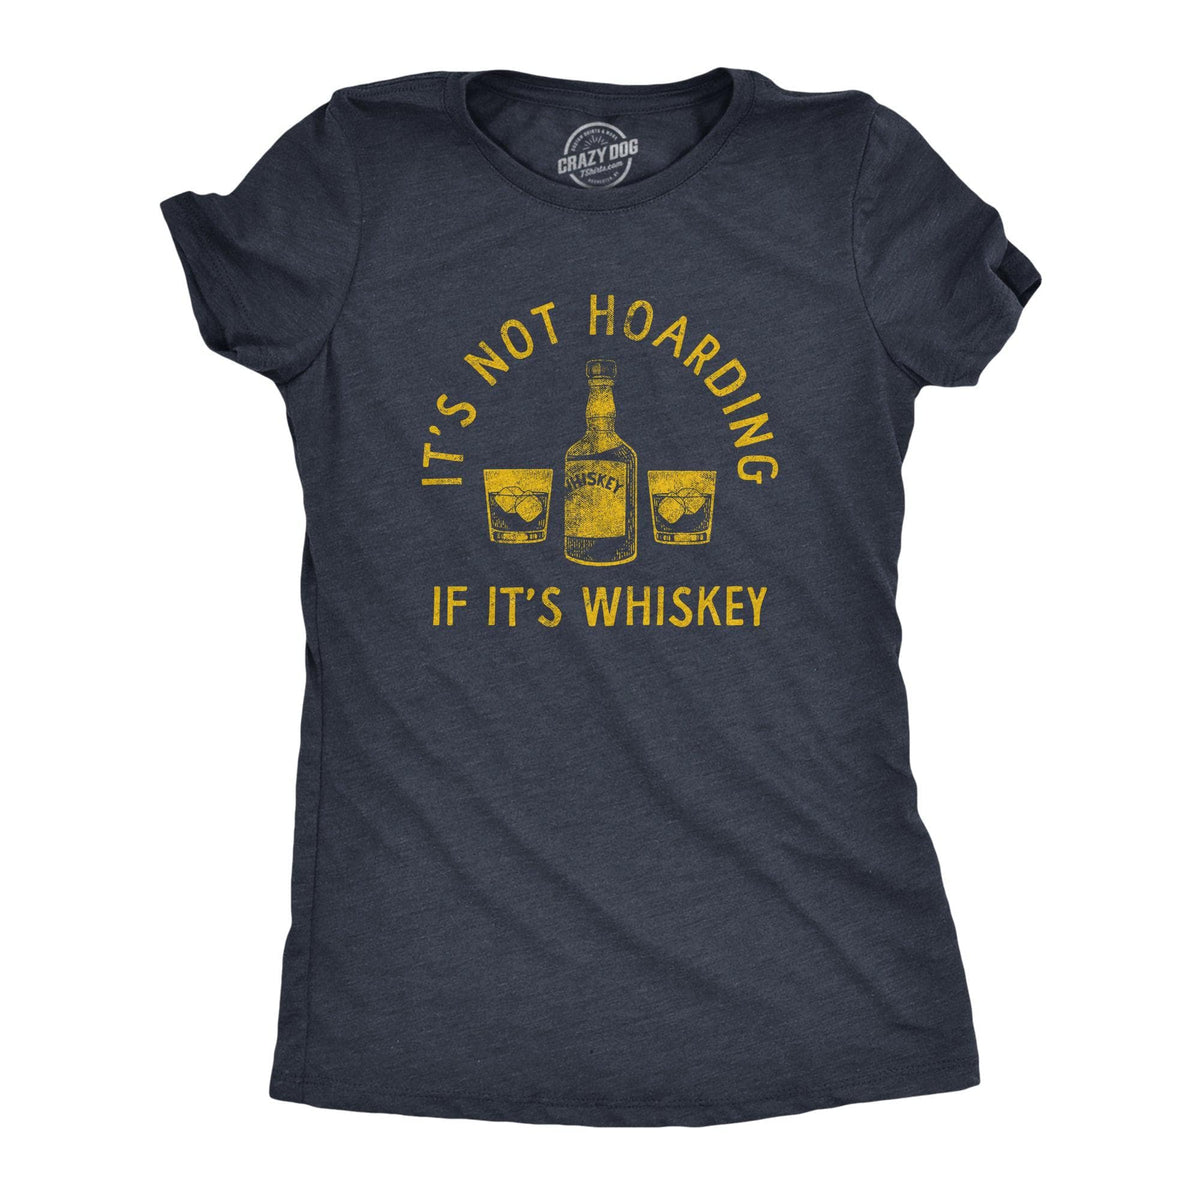 Its Not Hoarding If Its Whiskey Women&#39;s Tshirt  -  Crazy Dog T-Shirts